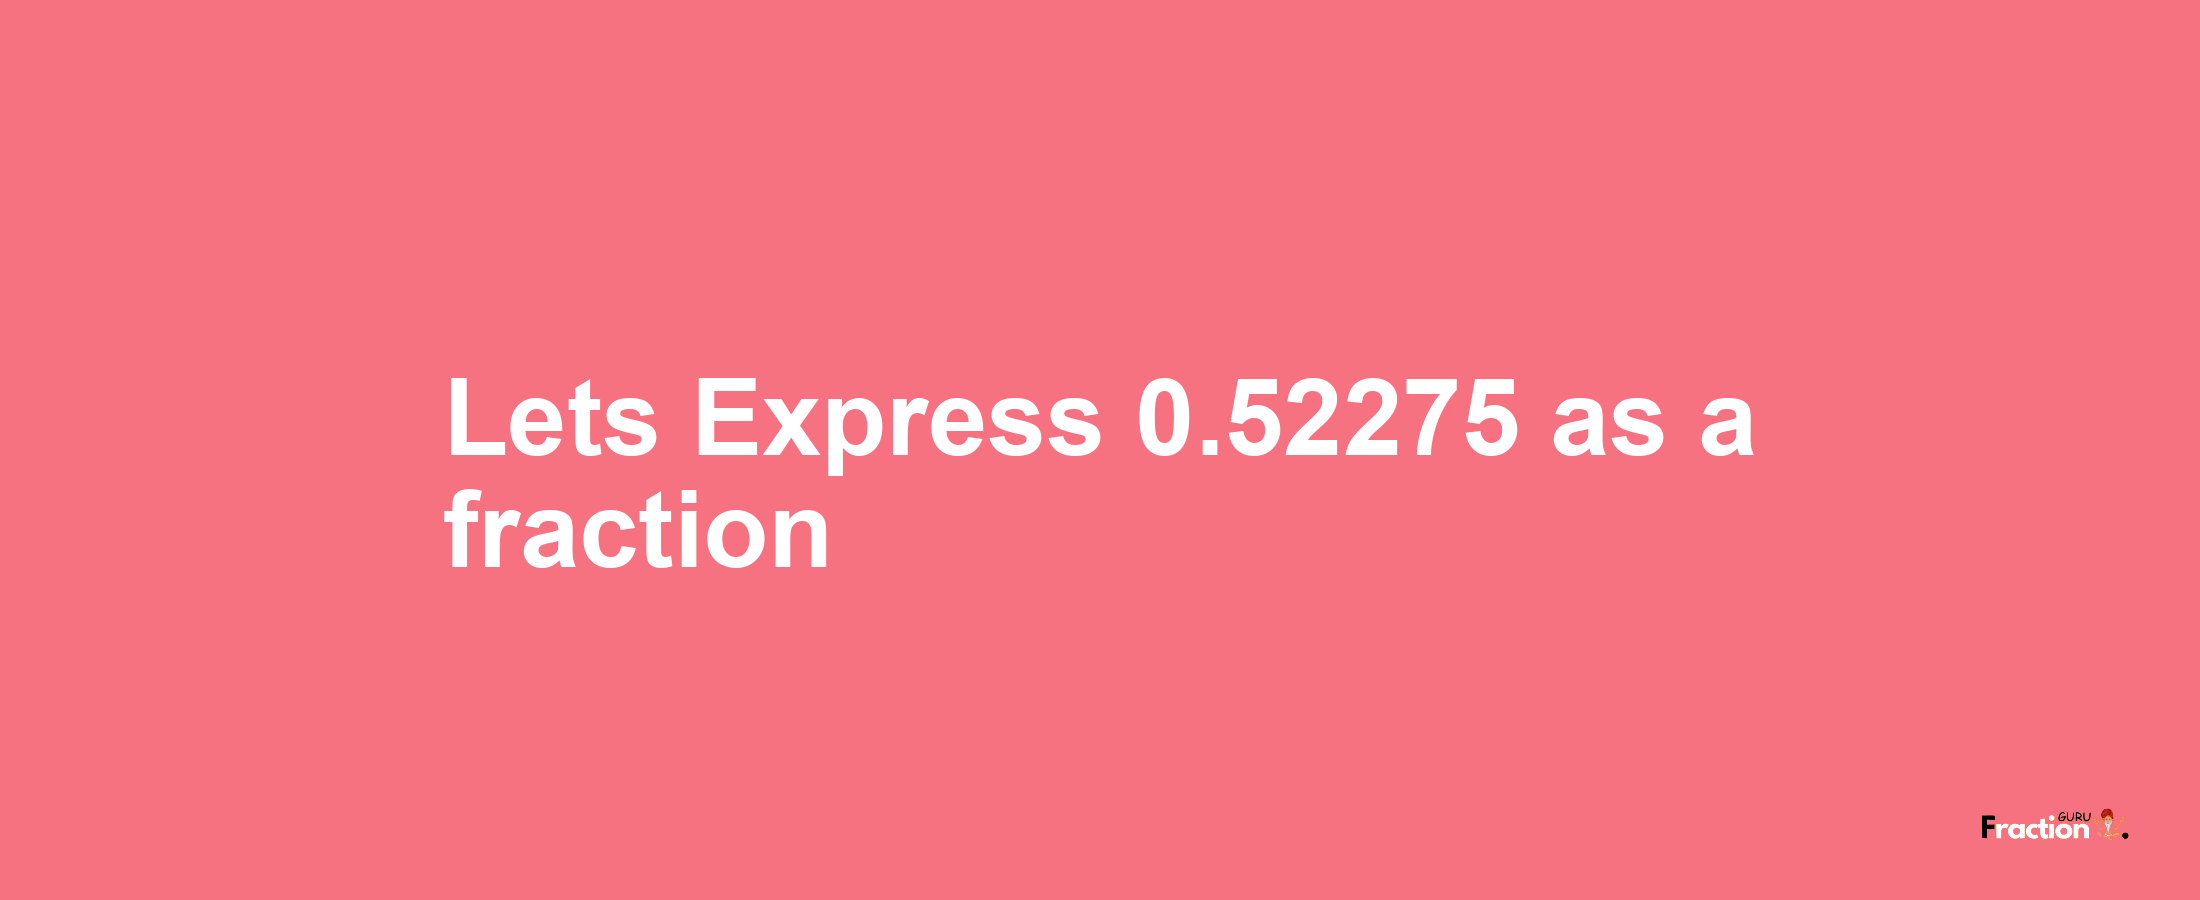 Lets Express 0.52275 as afraction